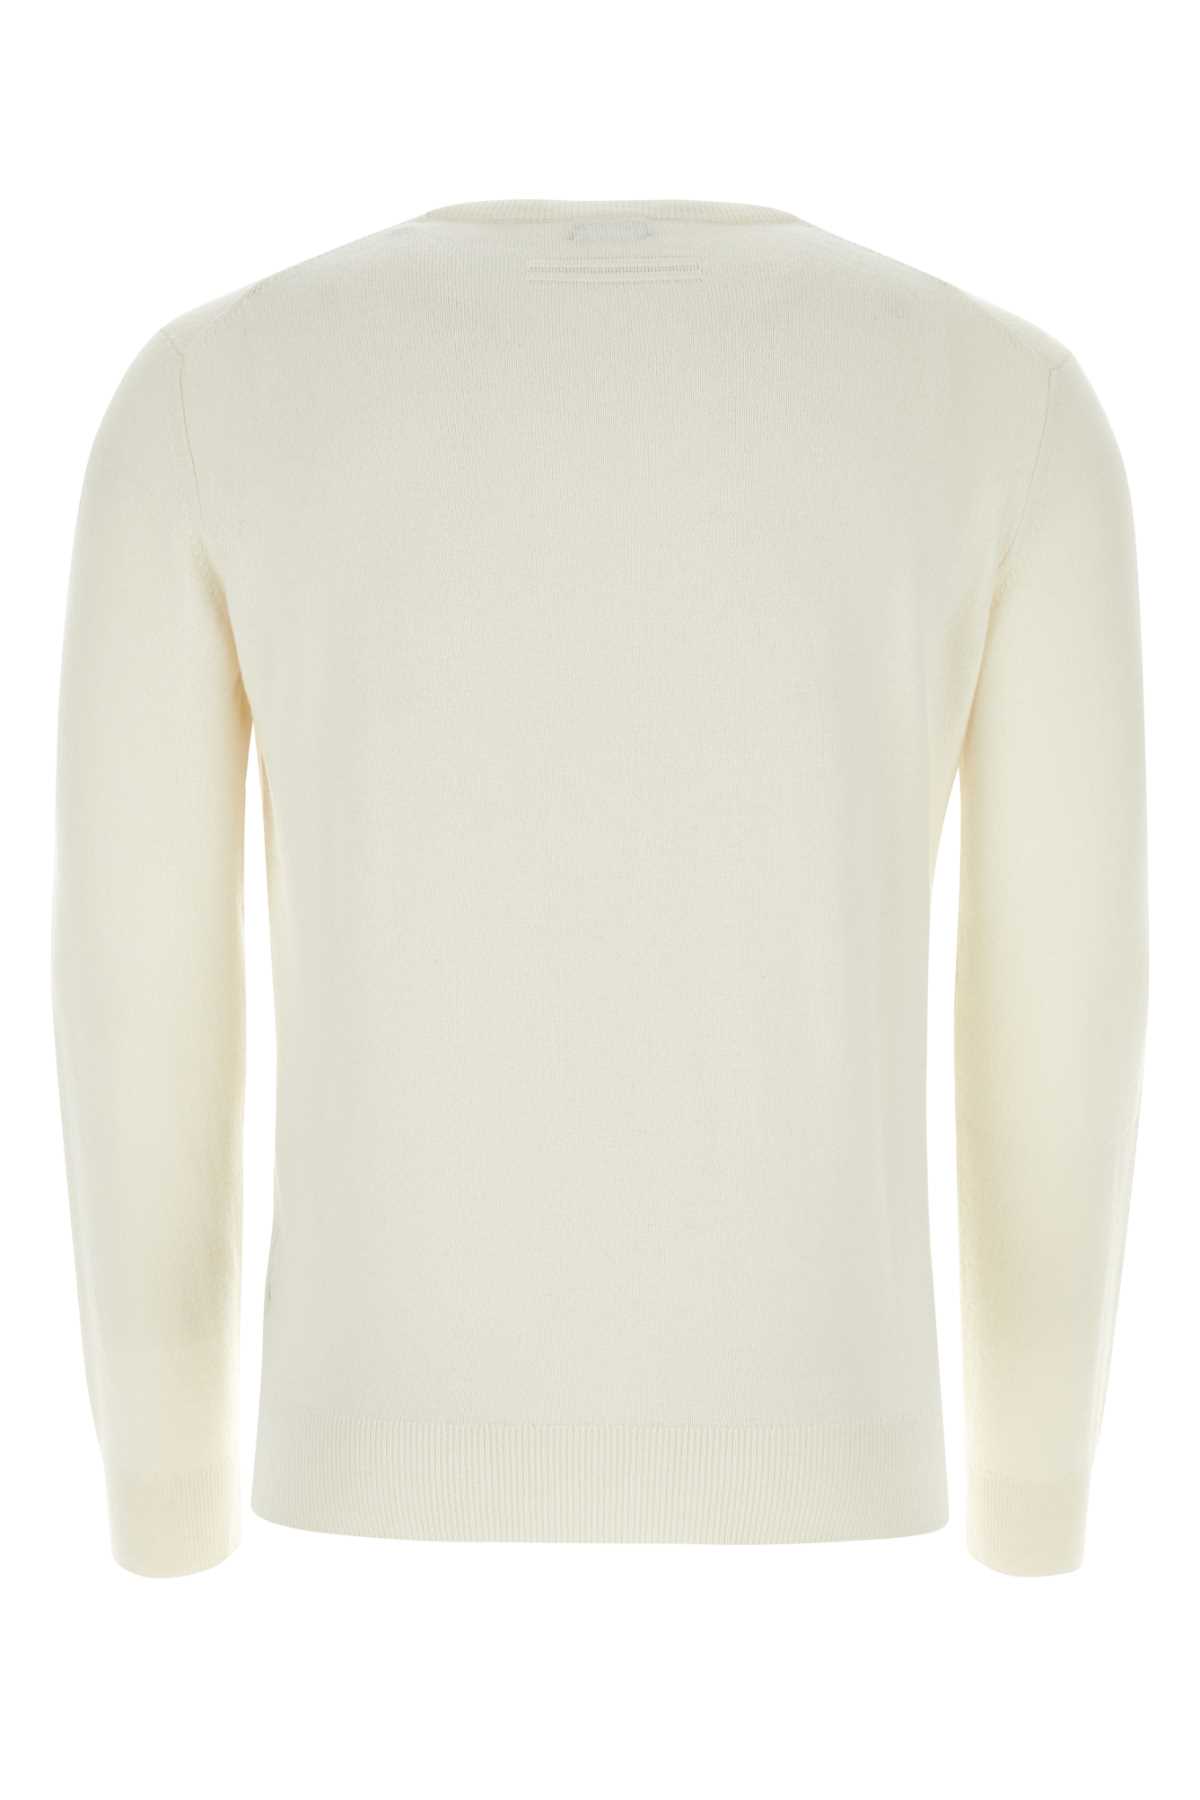 Zegna Ivory Cashmere Sweater In N91